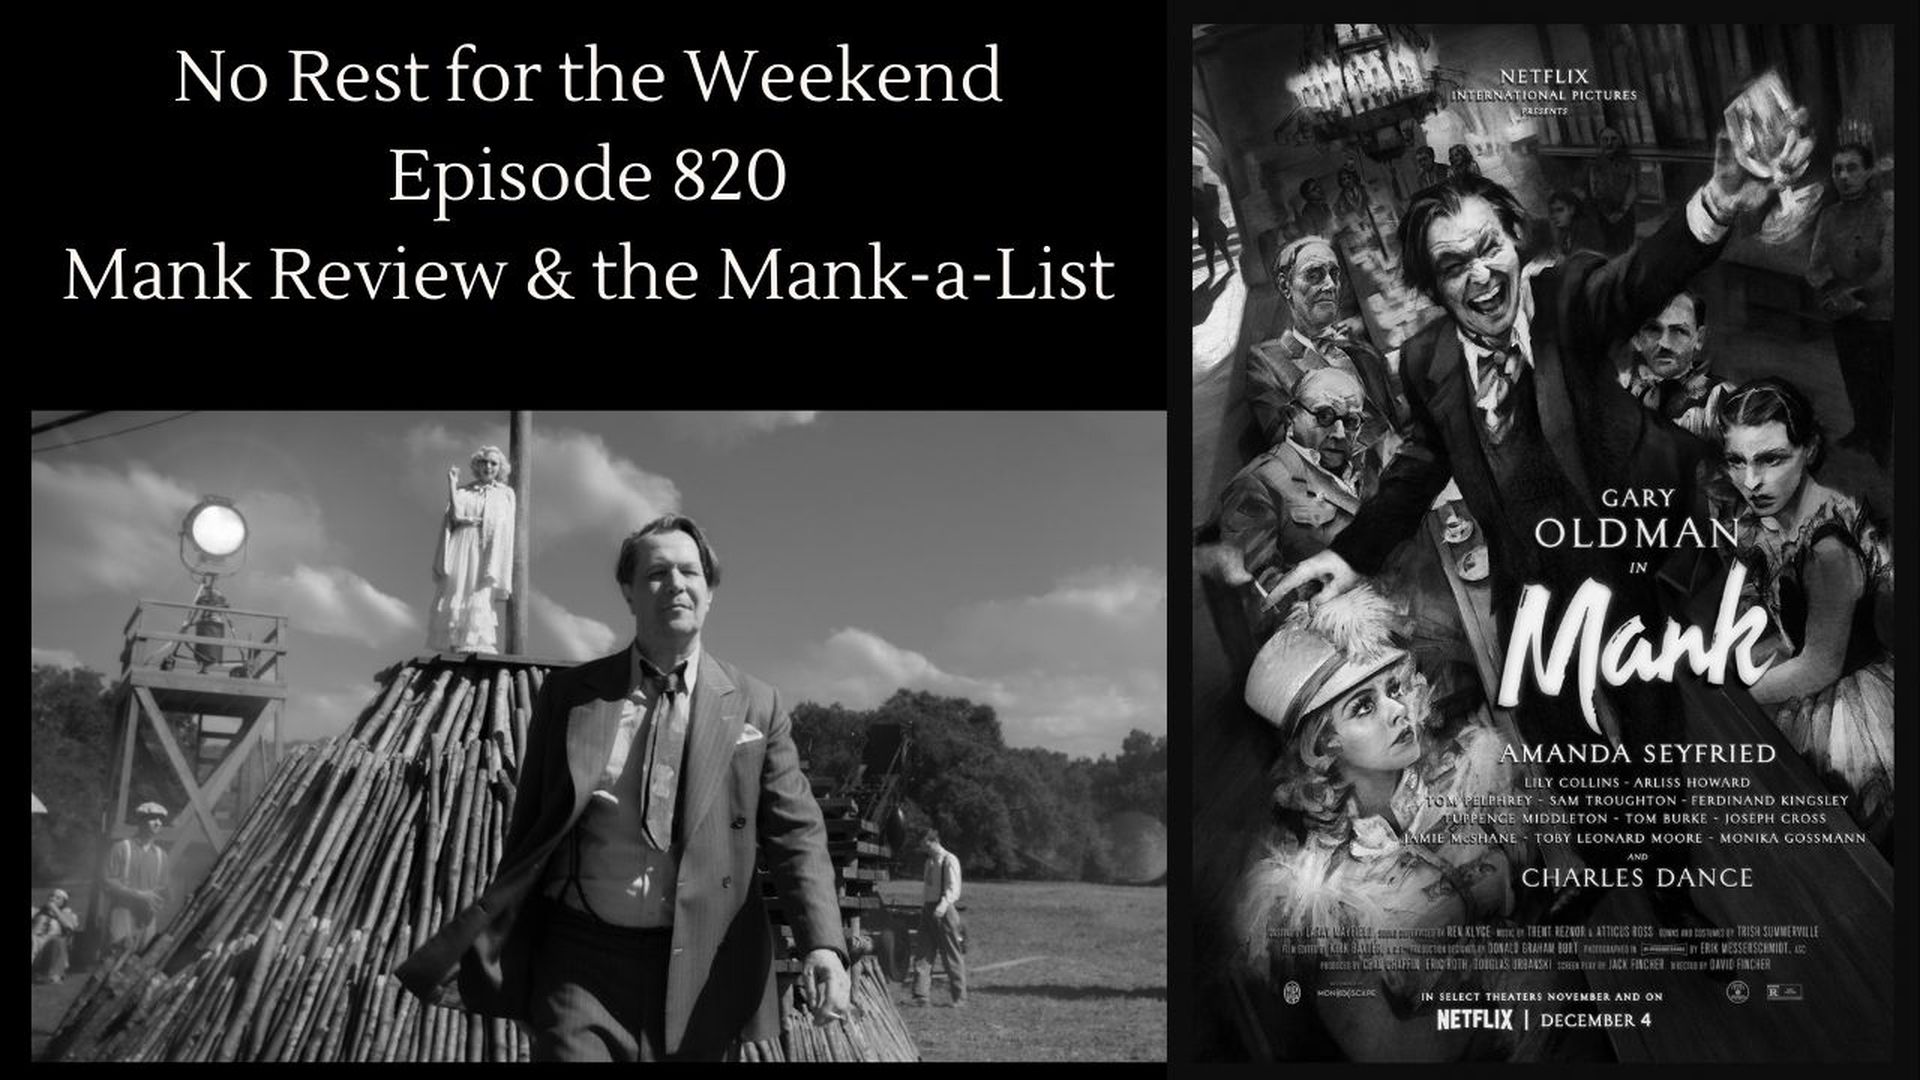 Episode 820: Mank Review & The Mank-a-List